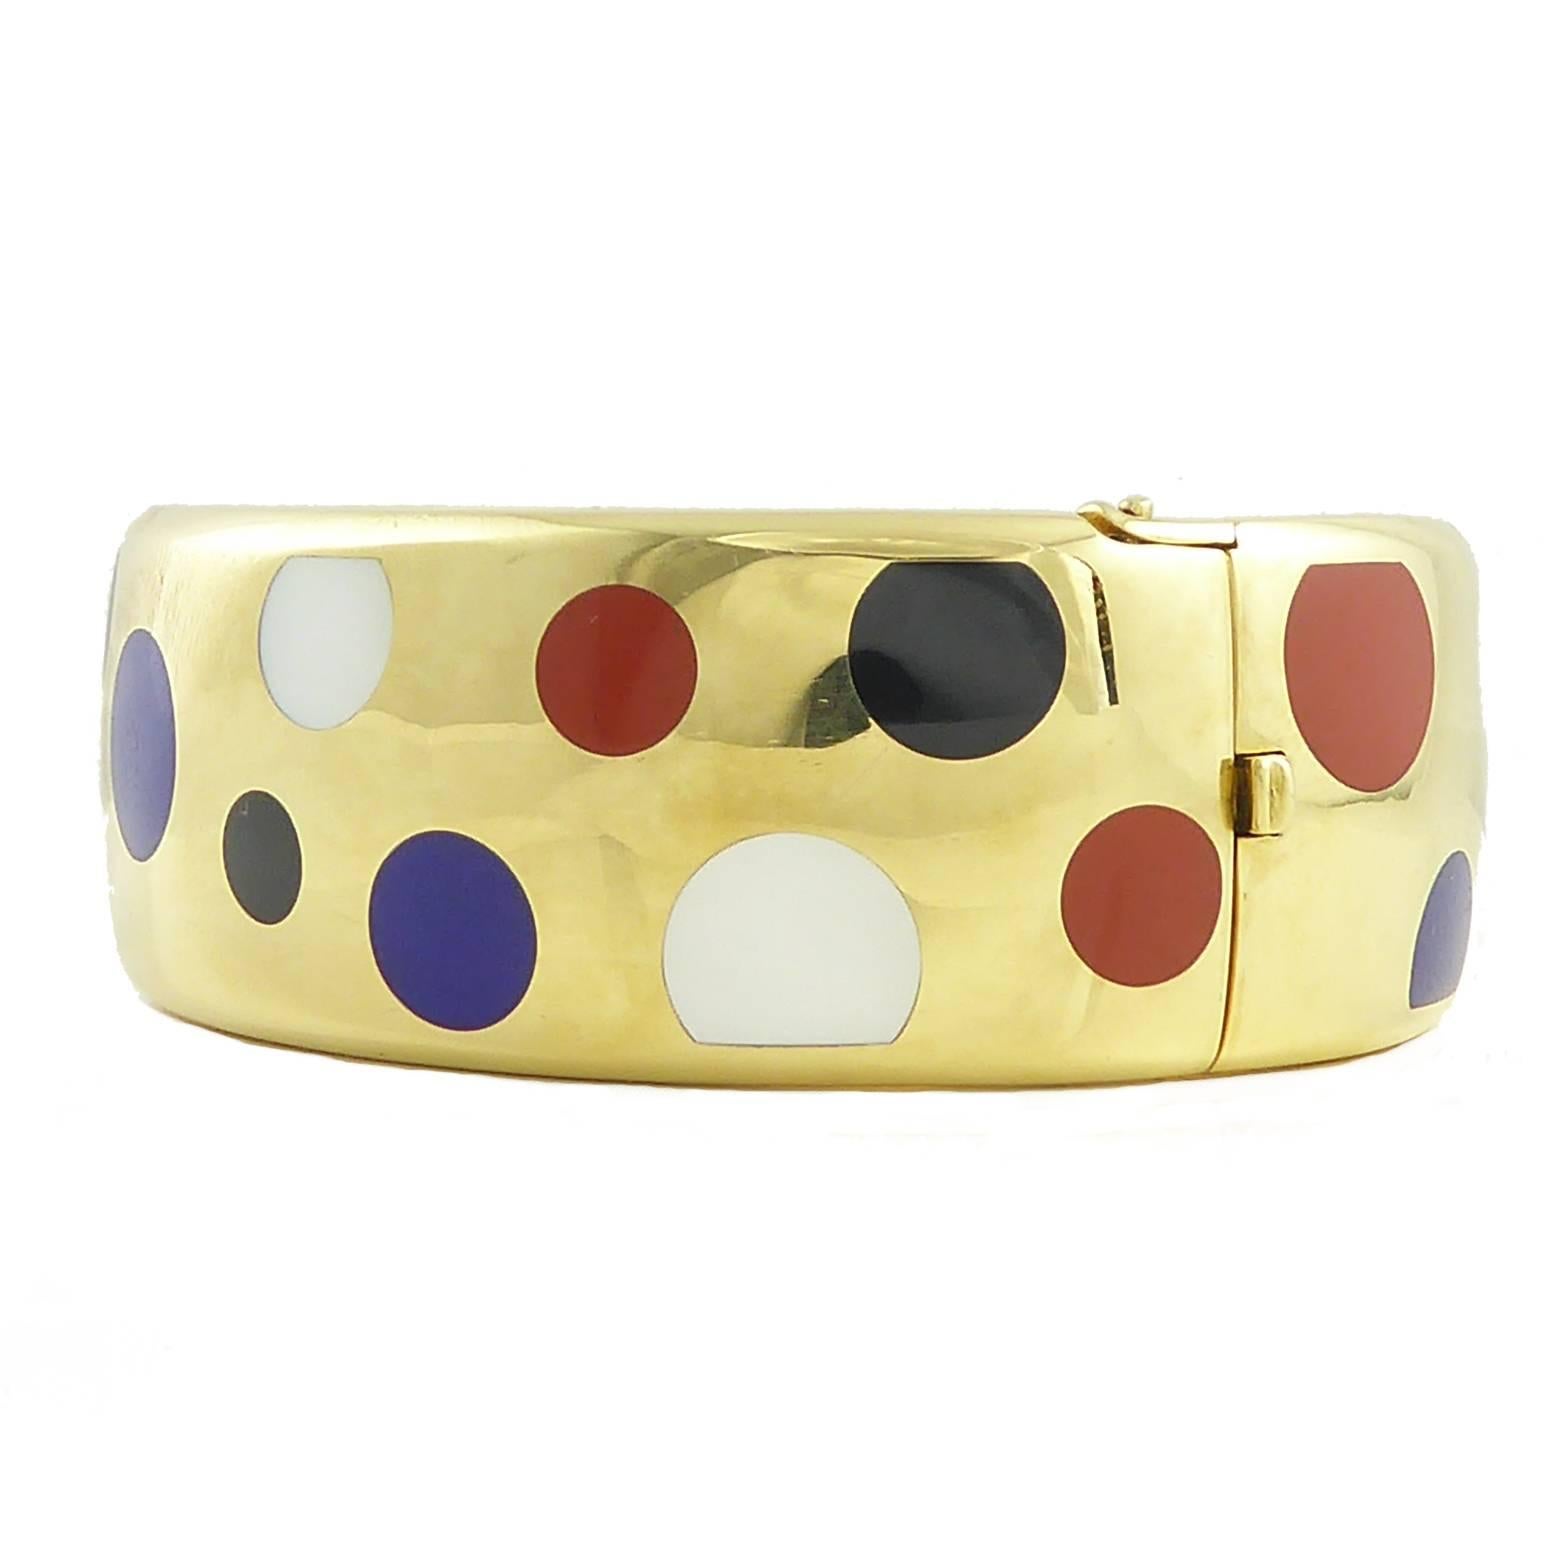 A glorious 18ct gold bangle by the celebrated Tiffany designer, Angela Cummings, inlaid with spots and dots of mother of pearl, lapis lazuli, onyx, and jasper.  The semi-precious gemstones are scattered randomy over a slightly domed bangle approx.